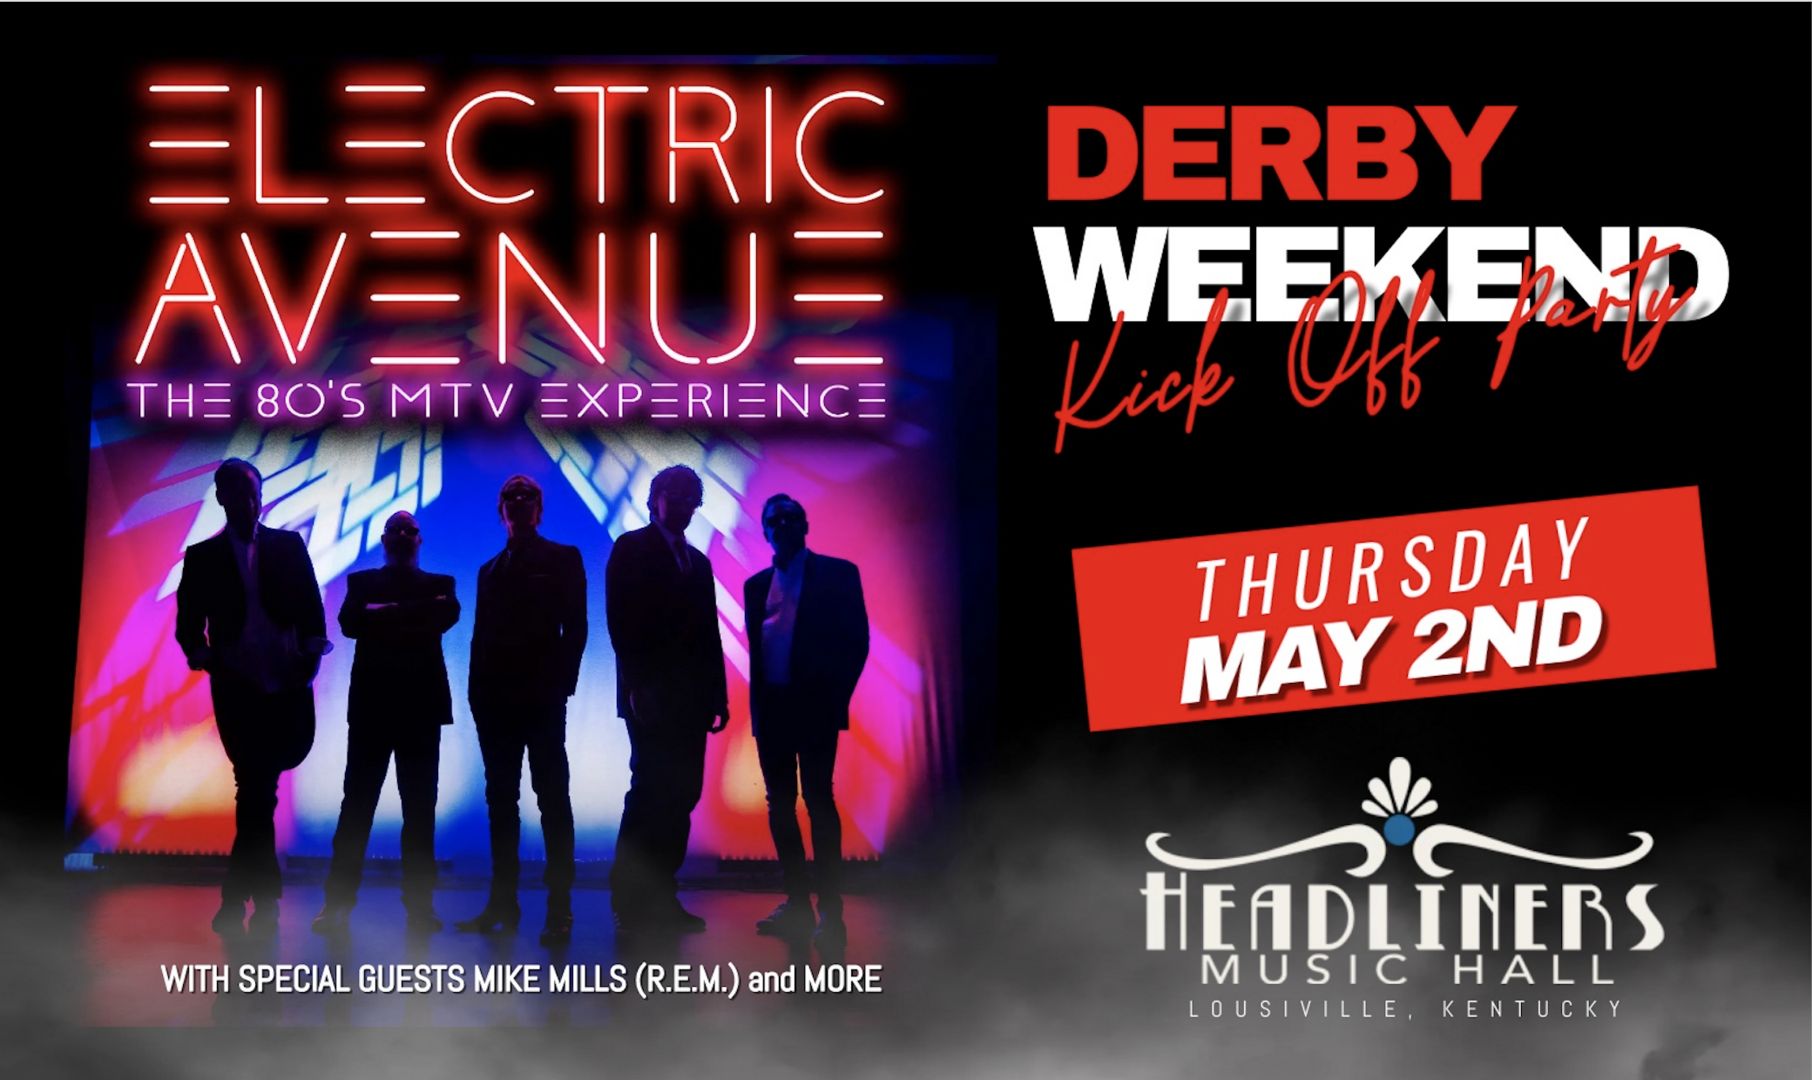 DERBY AFTER DARK - Derby Weekend Kick Off Party featuring Mike Mills (R.E.M.), Louisville, Kentucky, United States